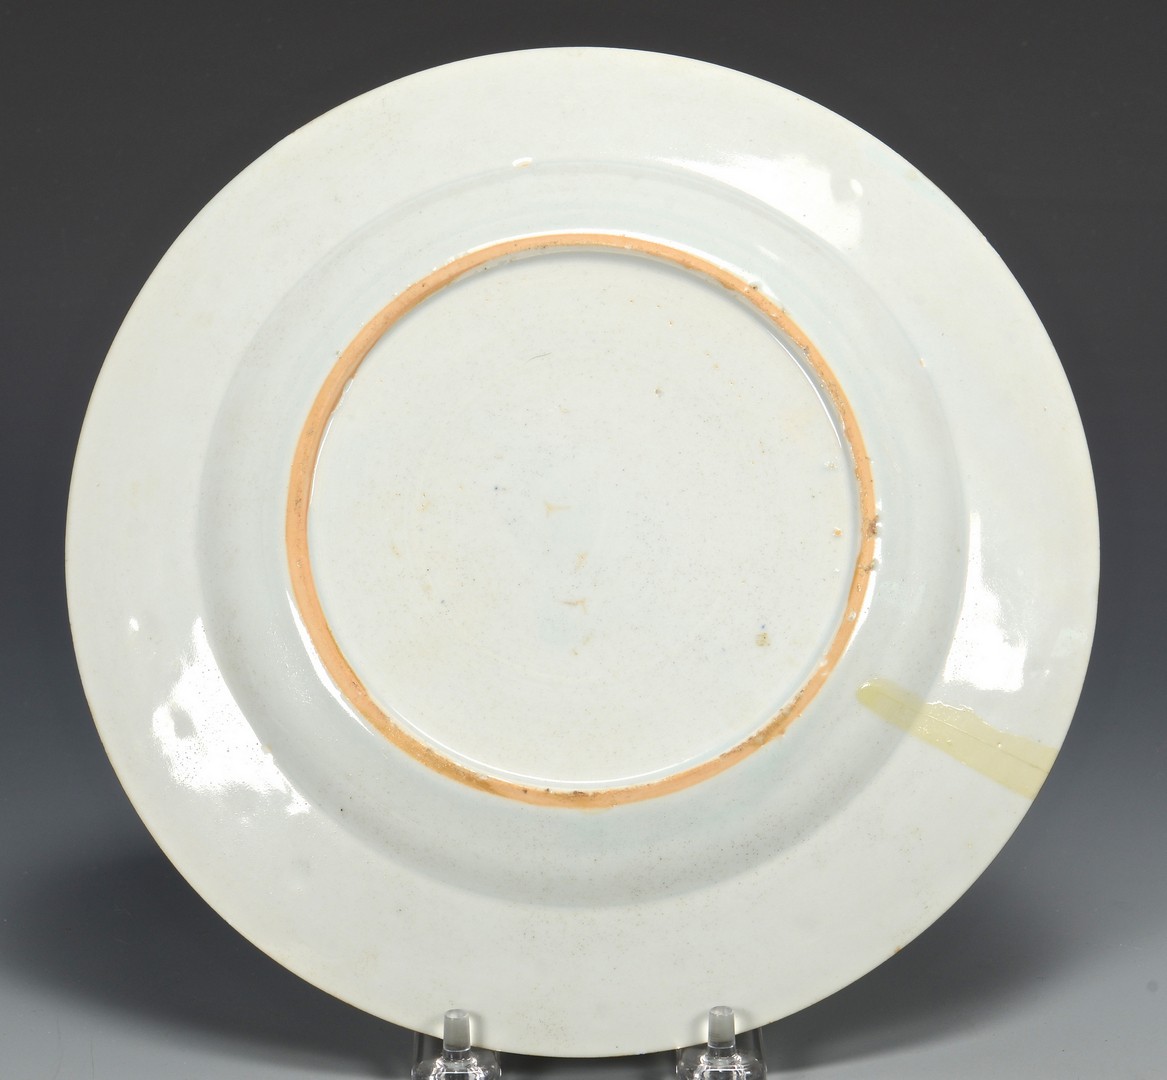 Lot 352: Grouping of Chinese Export Porcelain, 5 pcs.